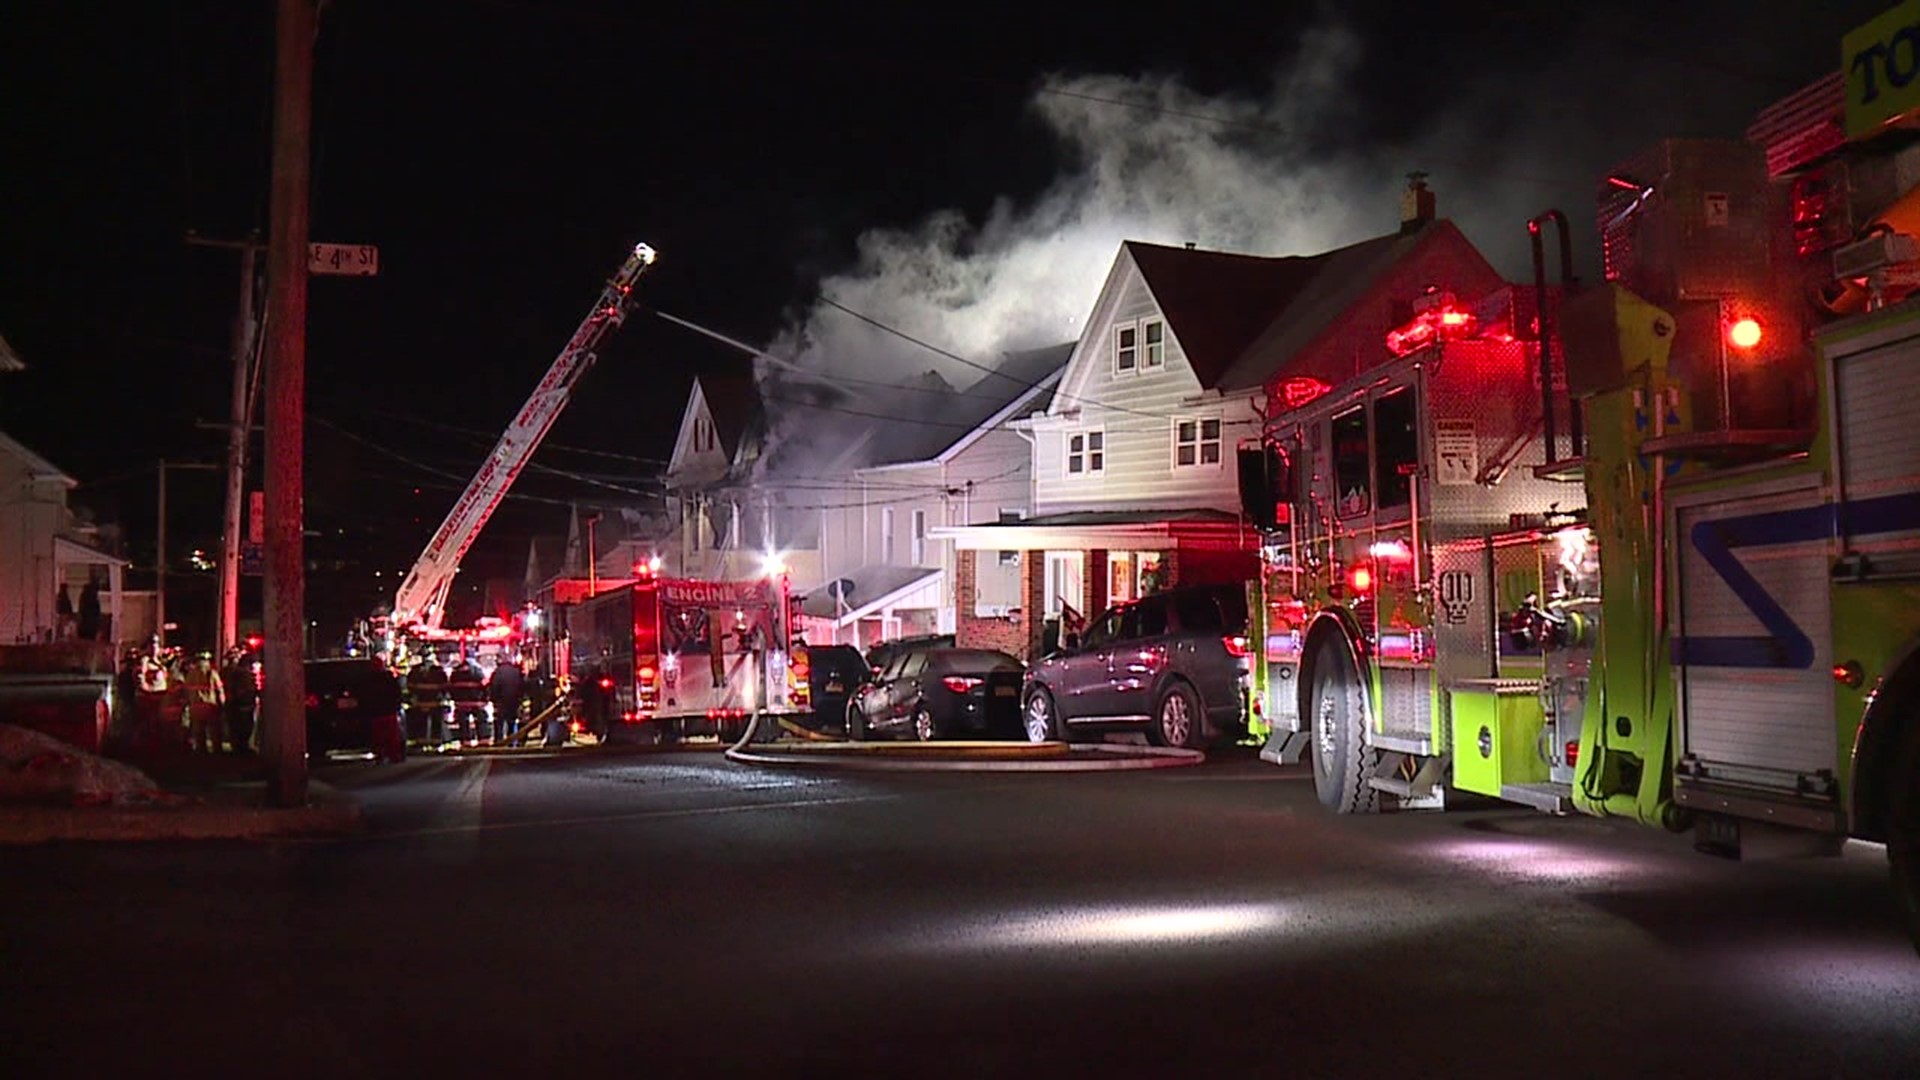 Crews from four fire companies were called to the blaze in Hazleton.